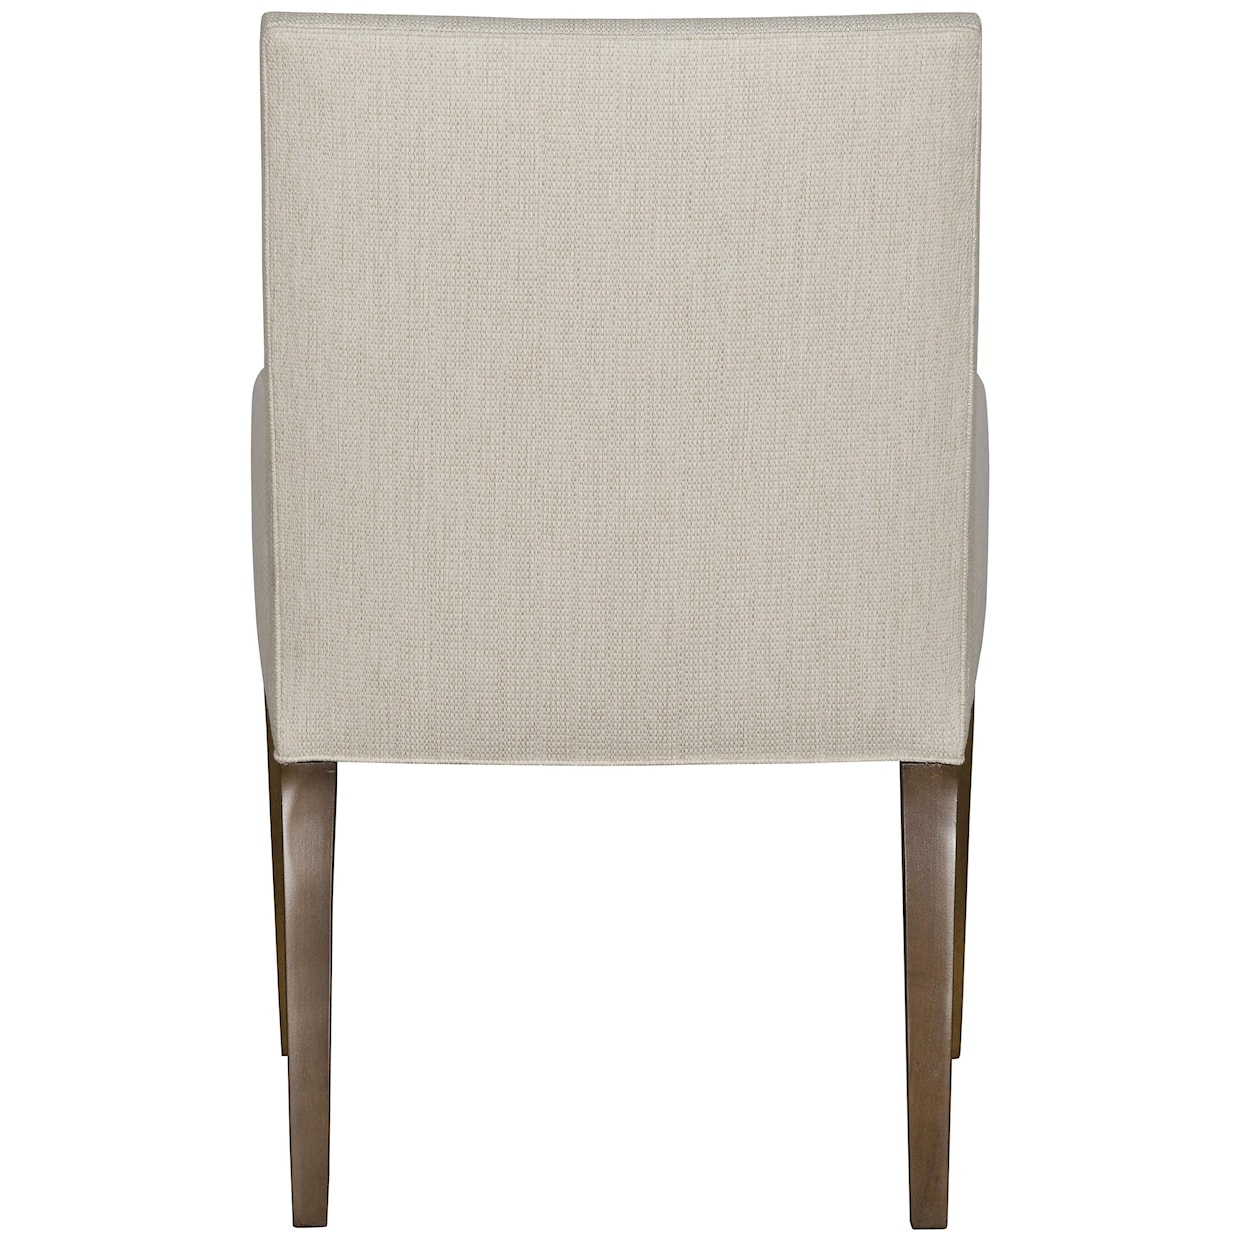 Vanguard Furniture Dune Dining Upholstered Arm Chair